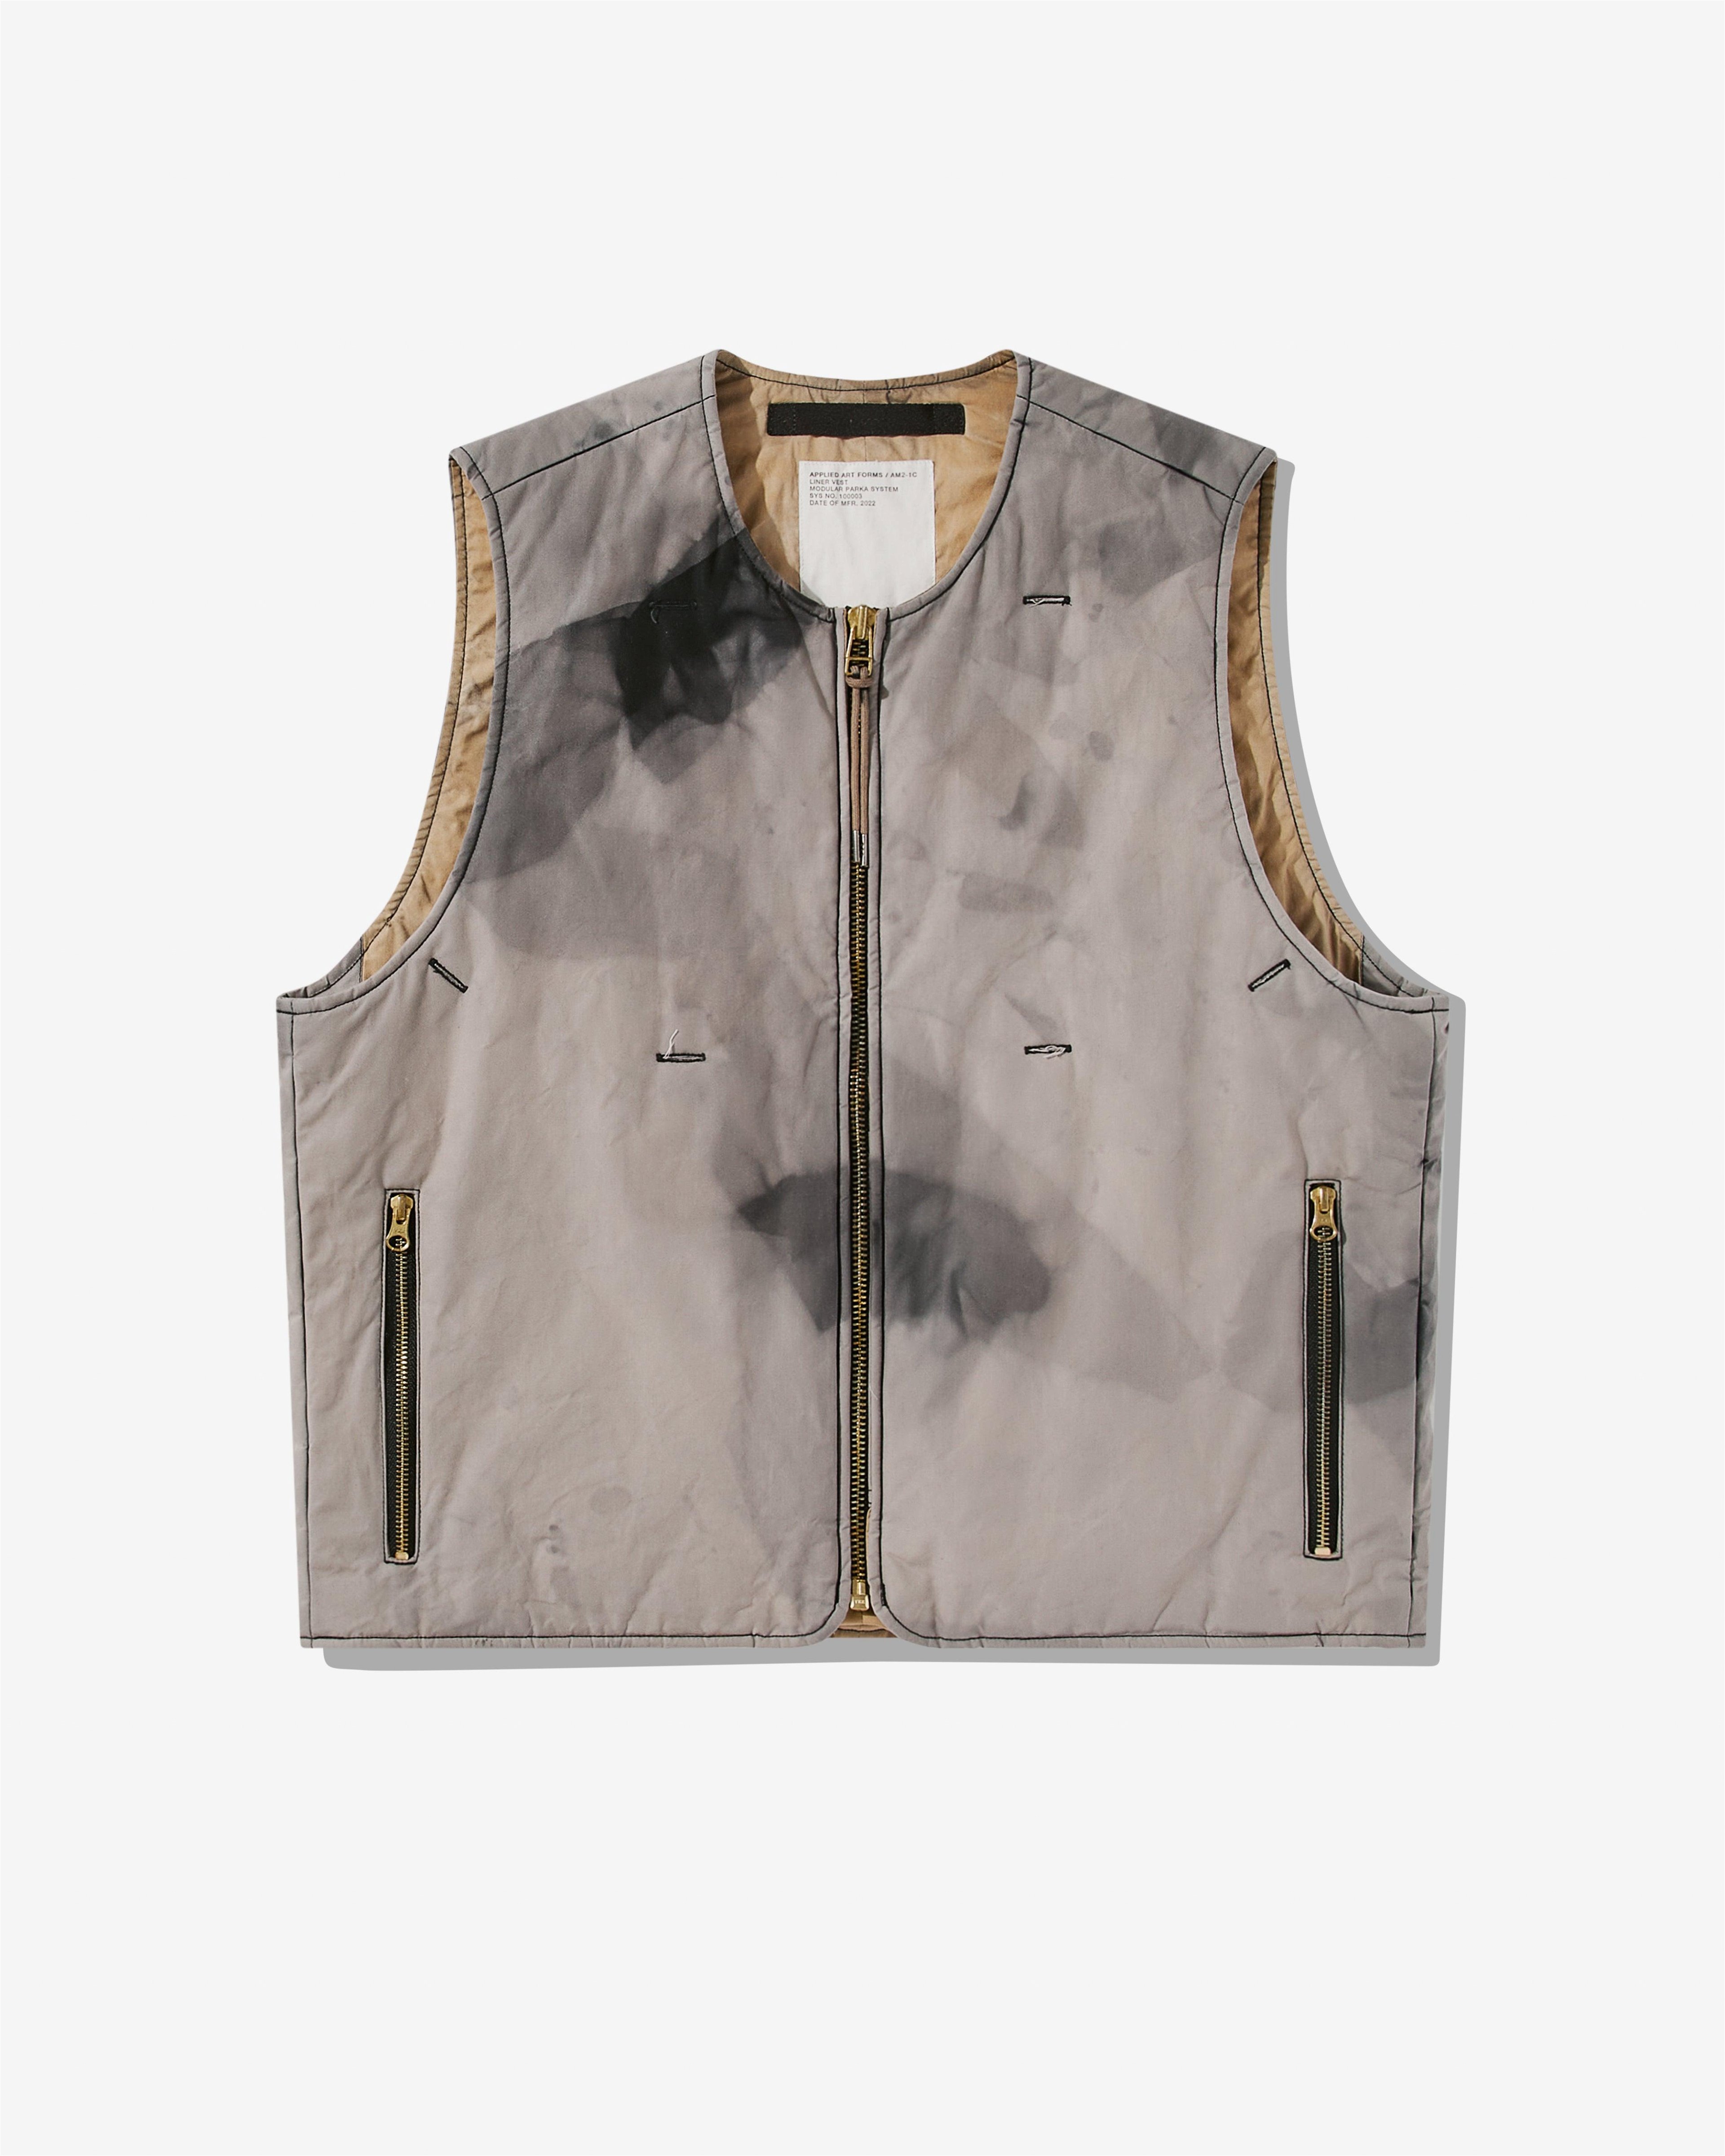 Applied Art Forms - Men's AM2-1C Liner Vest - (Treated) by APPLIED ART FORMS